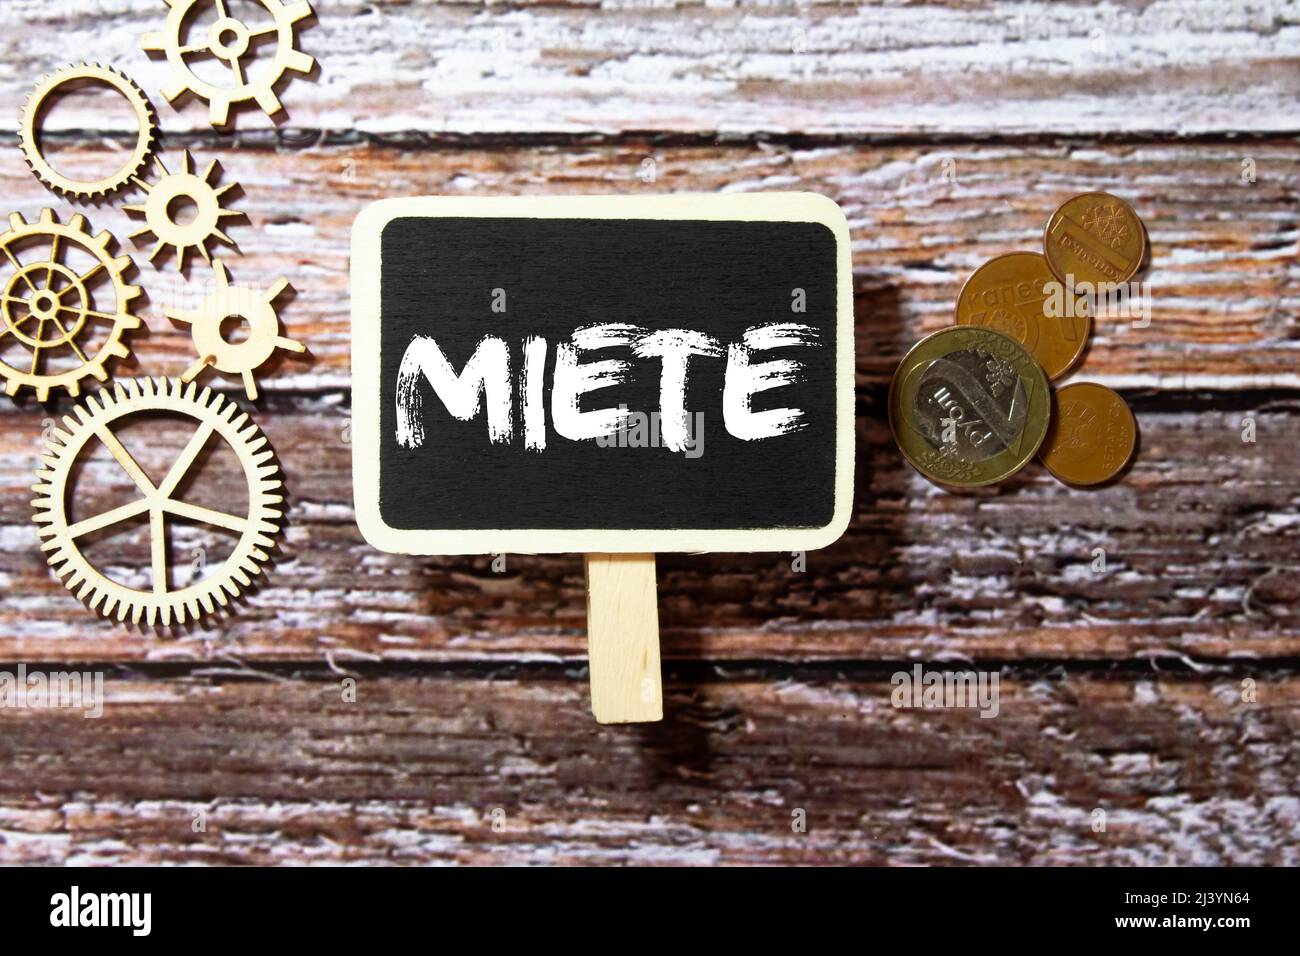 Miete in German language, white chalk type on black board, Euro money coin stacks of growth on wood table Stock Photo